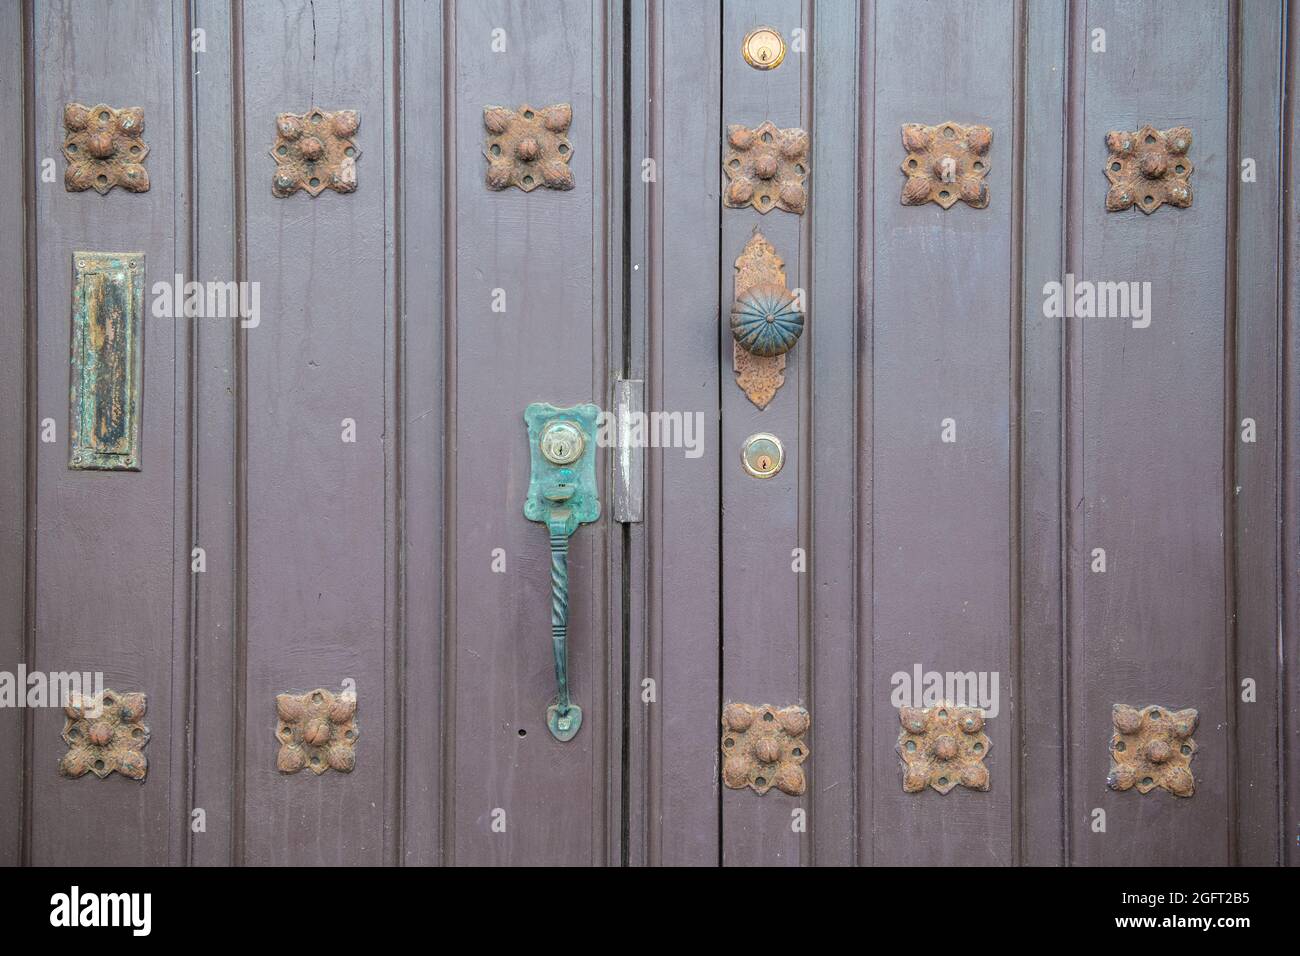 A set of wooden doors adorned with metal ornaments - Puerto Rico Stock Photo